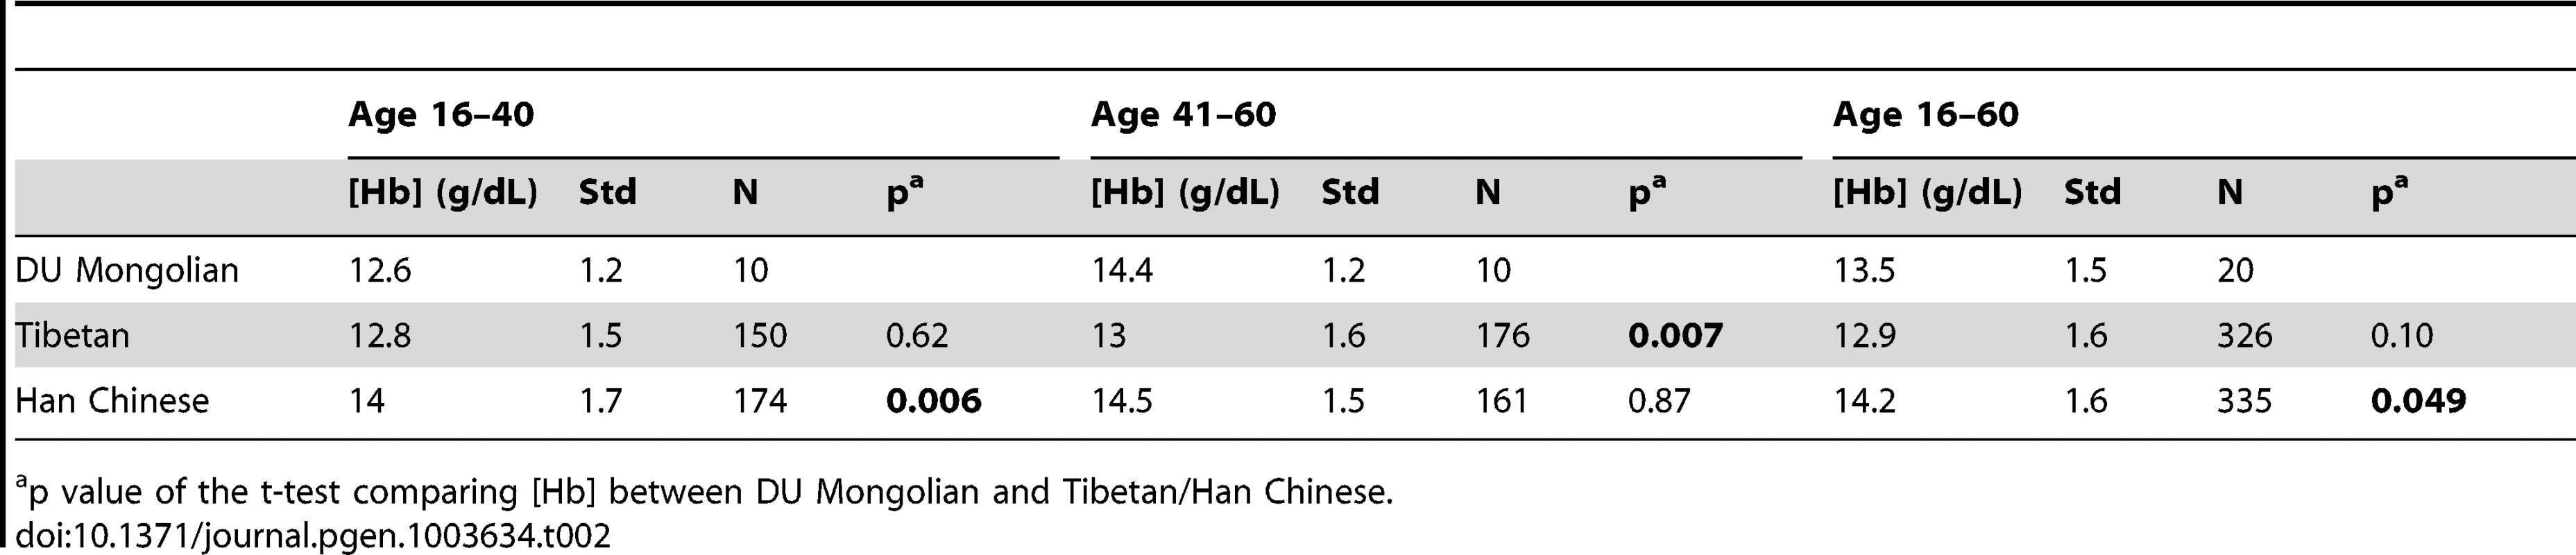 [Hb] comparisons among DU Mongolians, Tibetans, and Han Chinese.